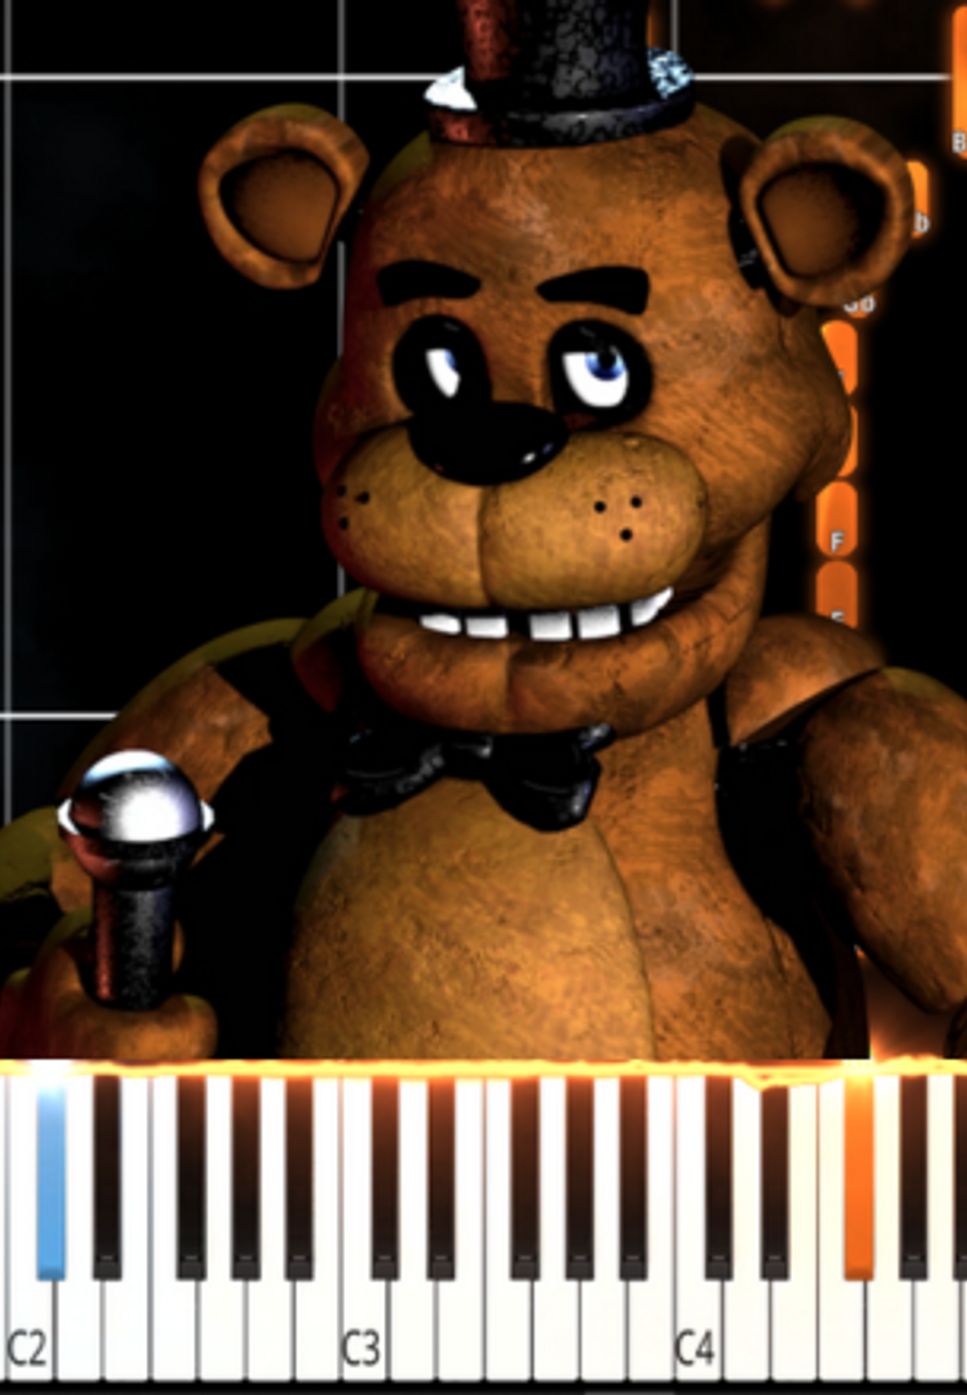 Five Nights at Freddy's 3 - Die in Fire by Marco D.